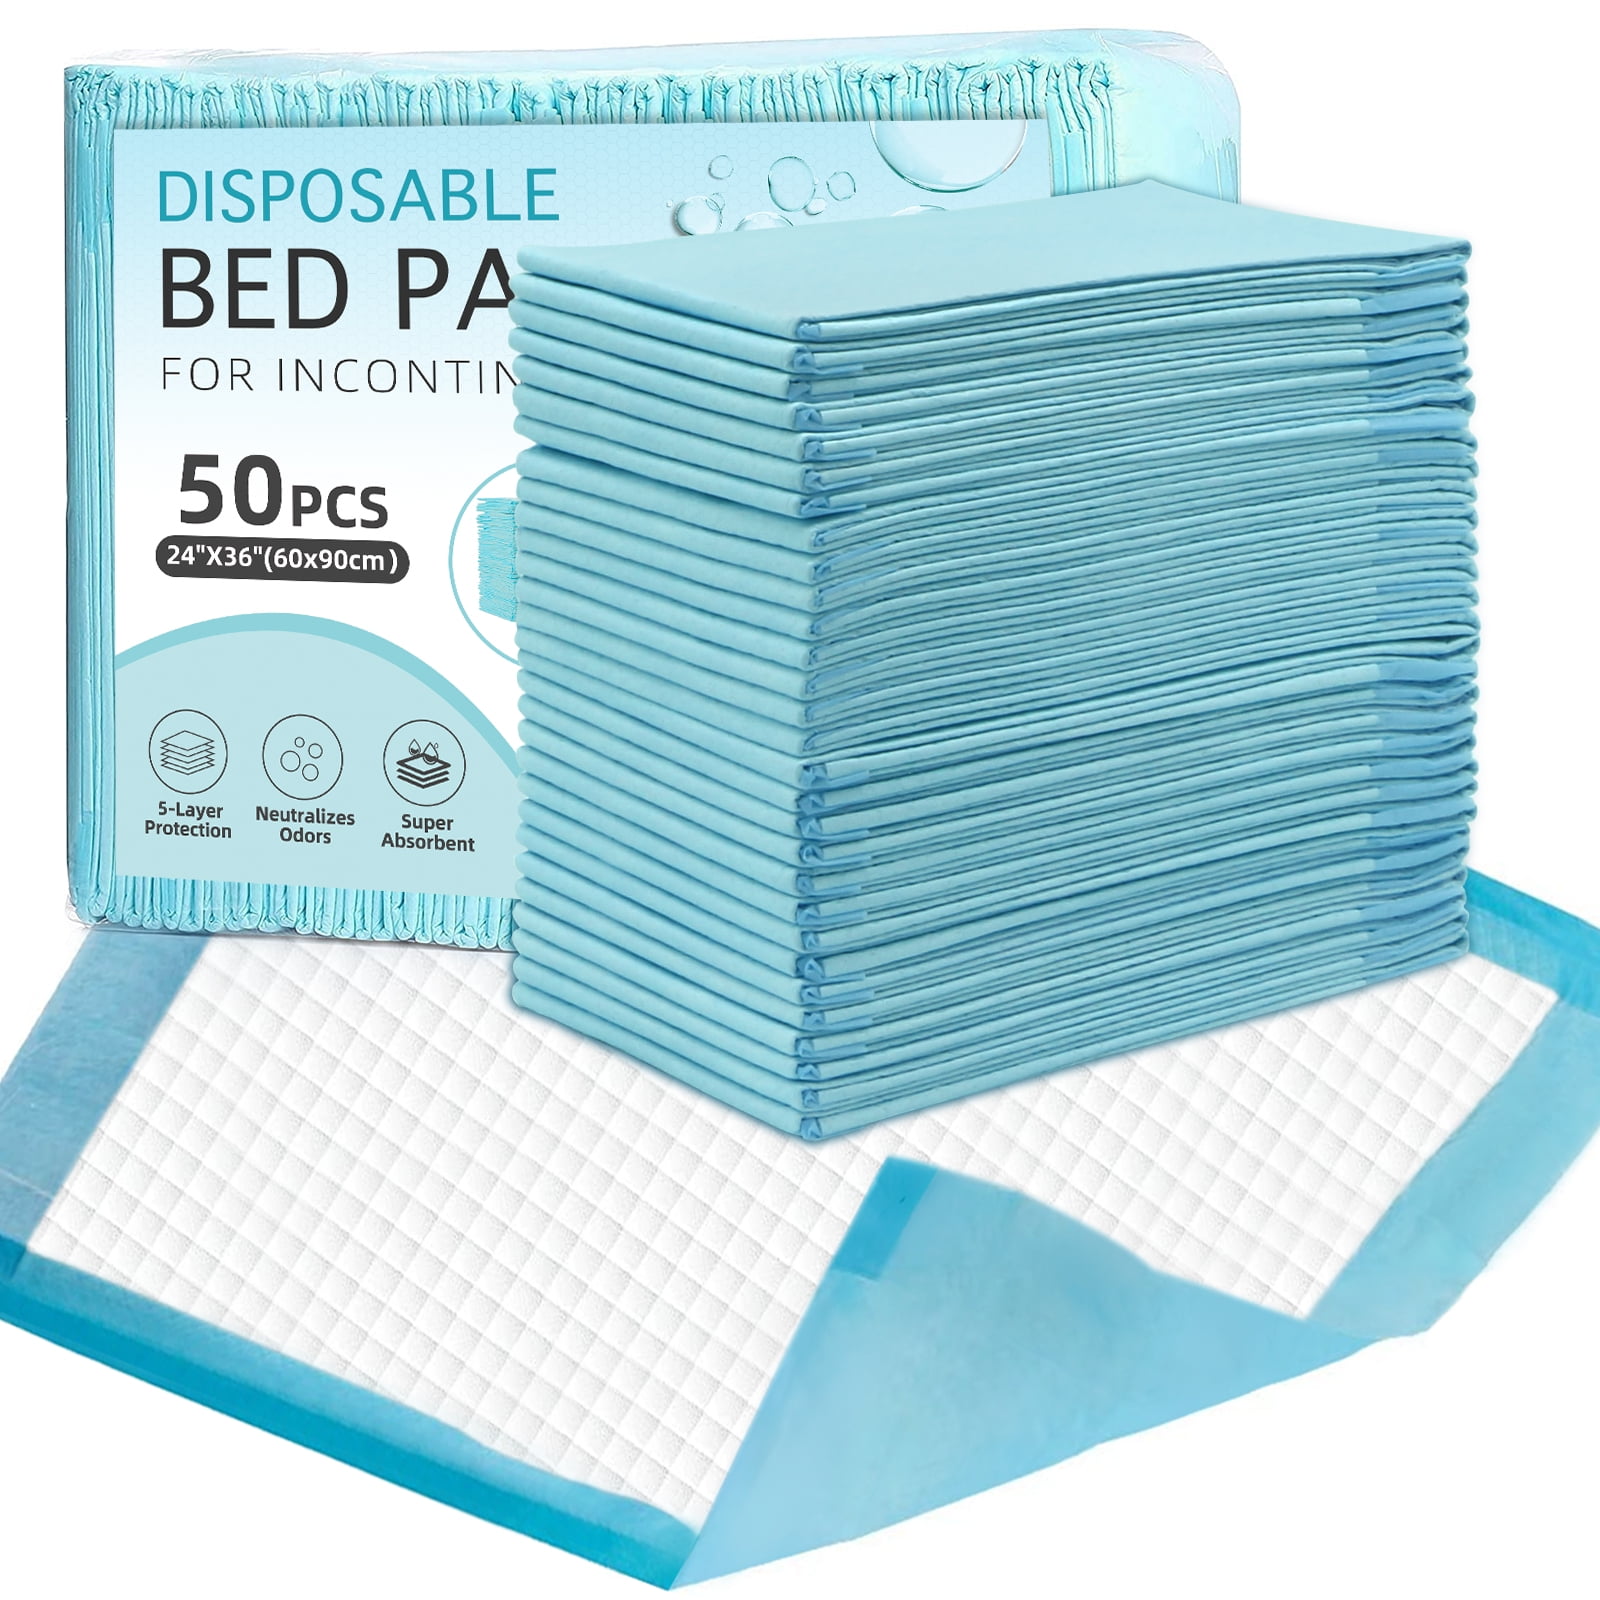 Bed Pads for Incontinence Disposable - XL Heavy Duty Pads for Beds for  Incontinence Adults 375LB Transfer Capacity Anti Bunch Absorbent Leak  Protector